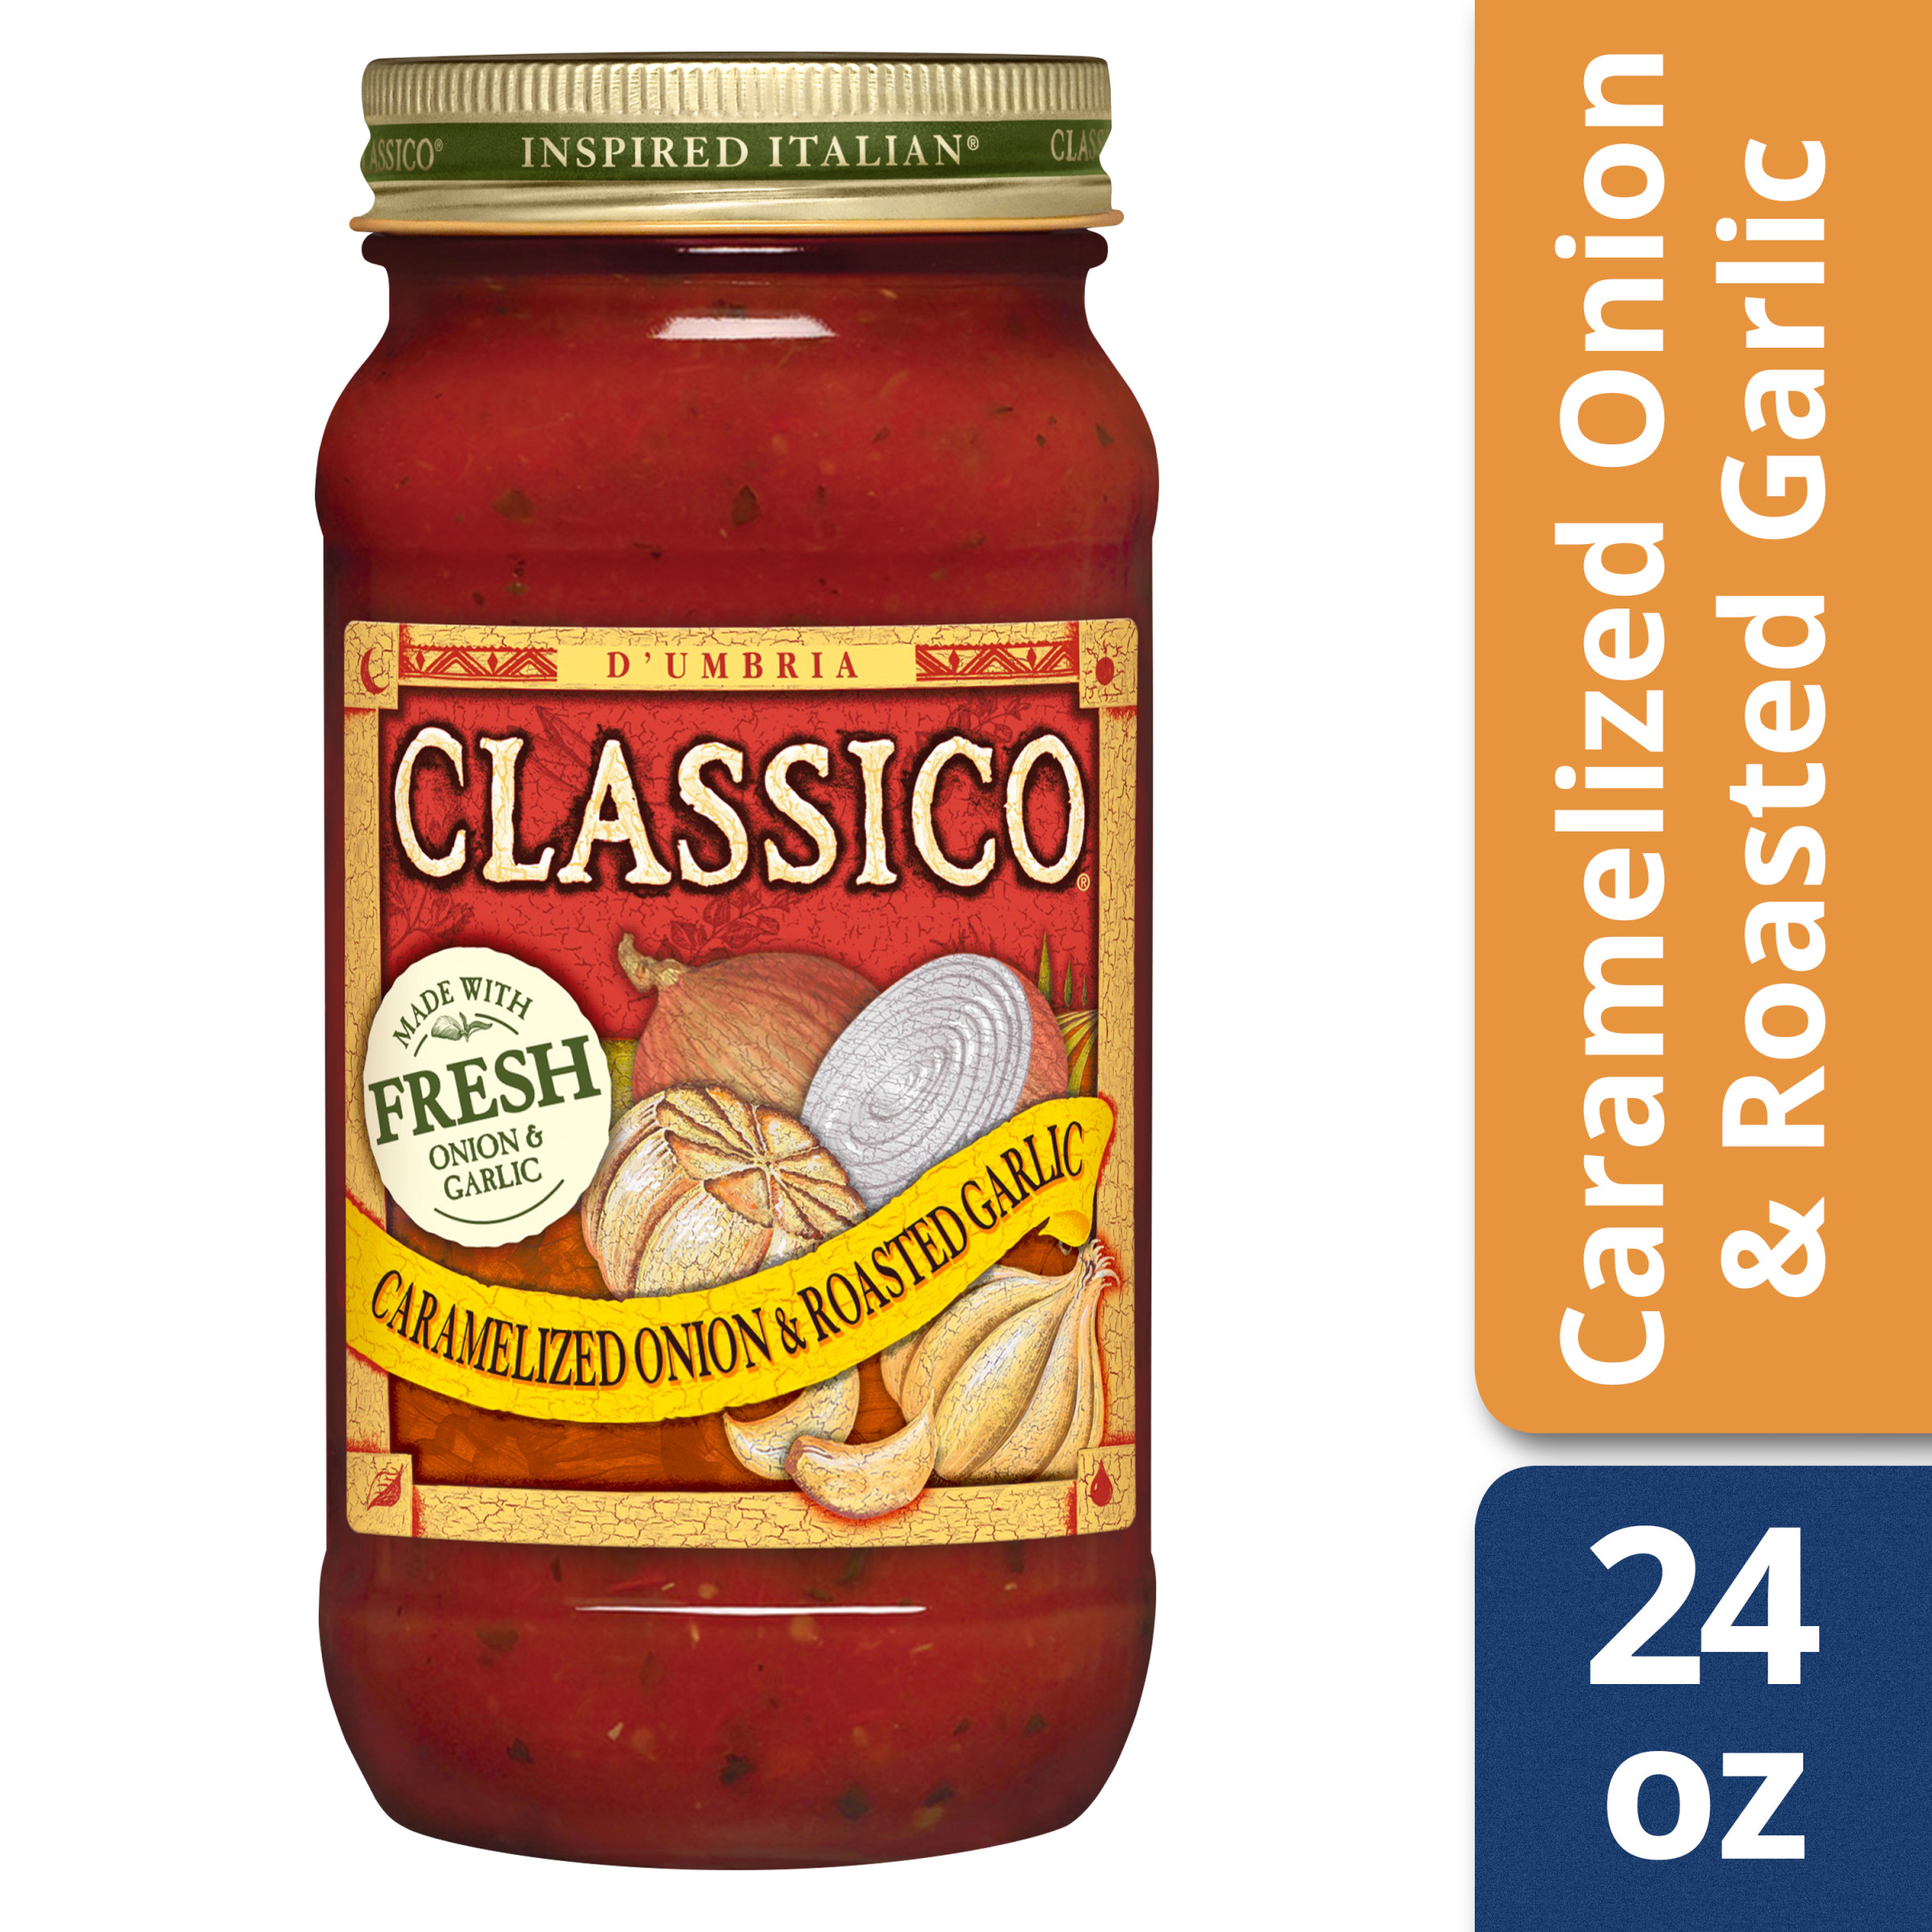 Classico Caramelized Onion and Roasted Garlic Pasta Sauce ...